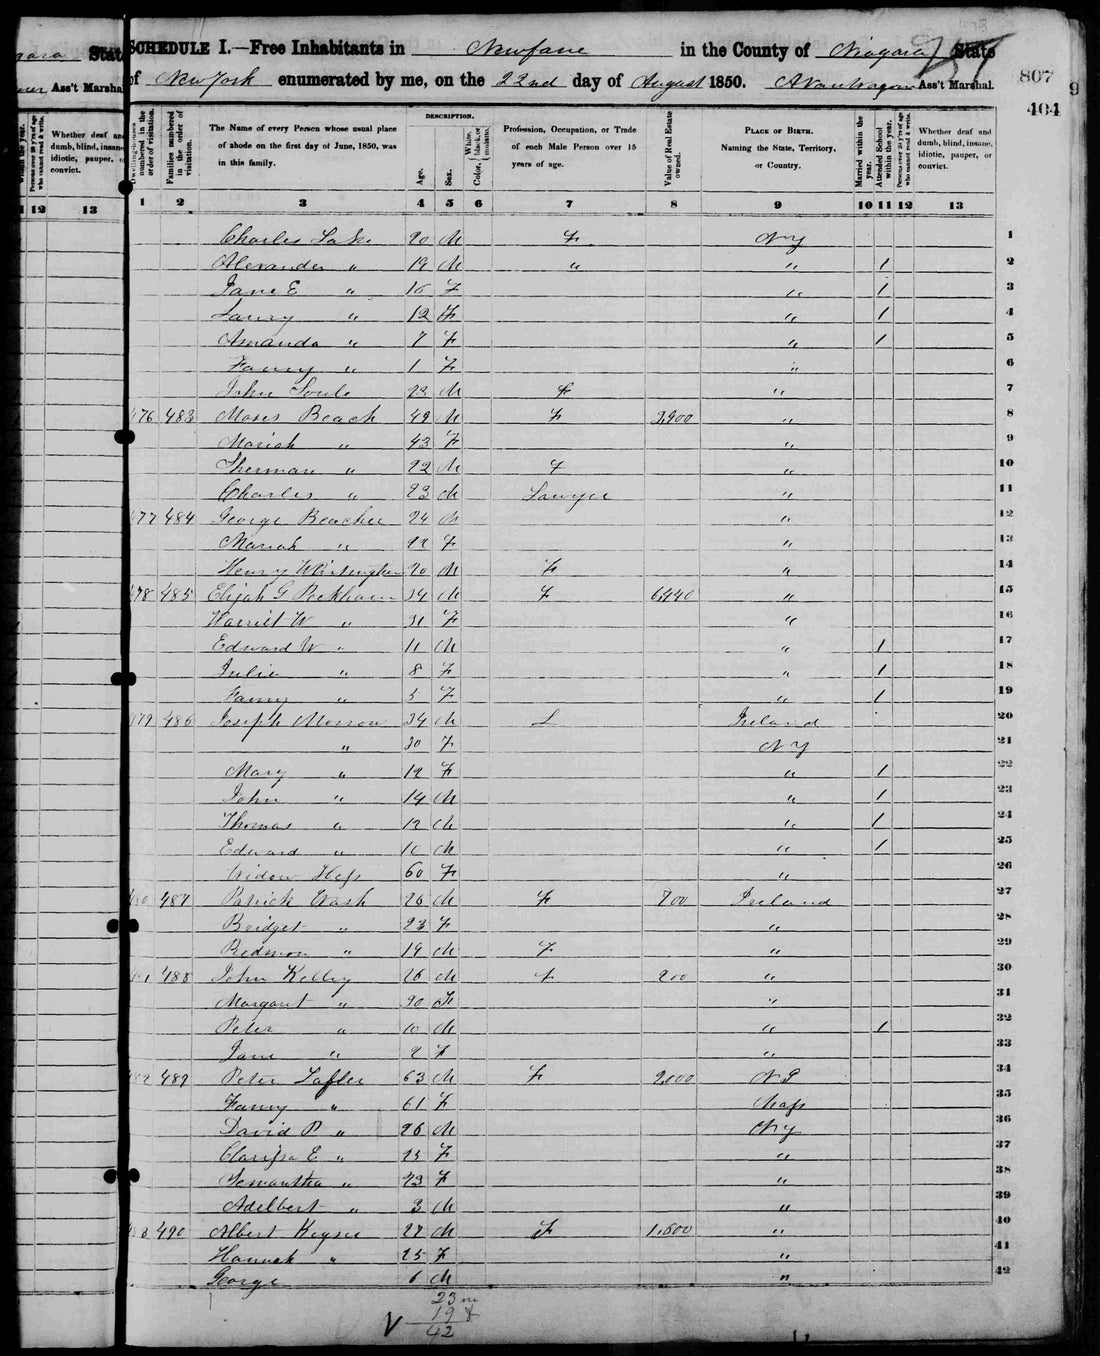 Video: How to access FREE 1850 census records